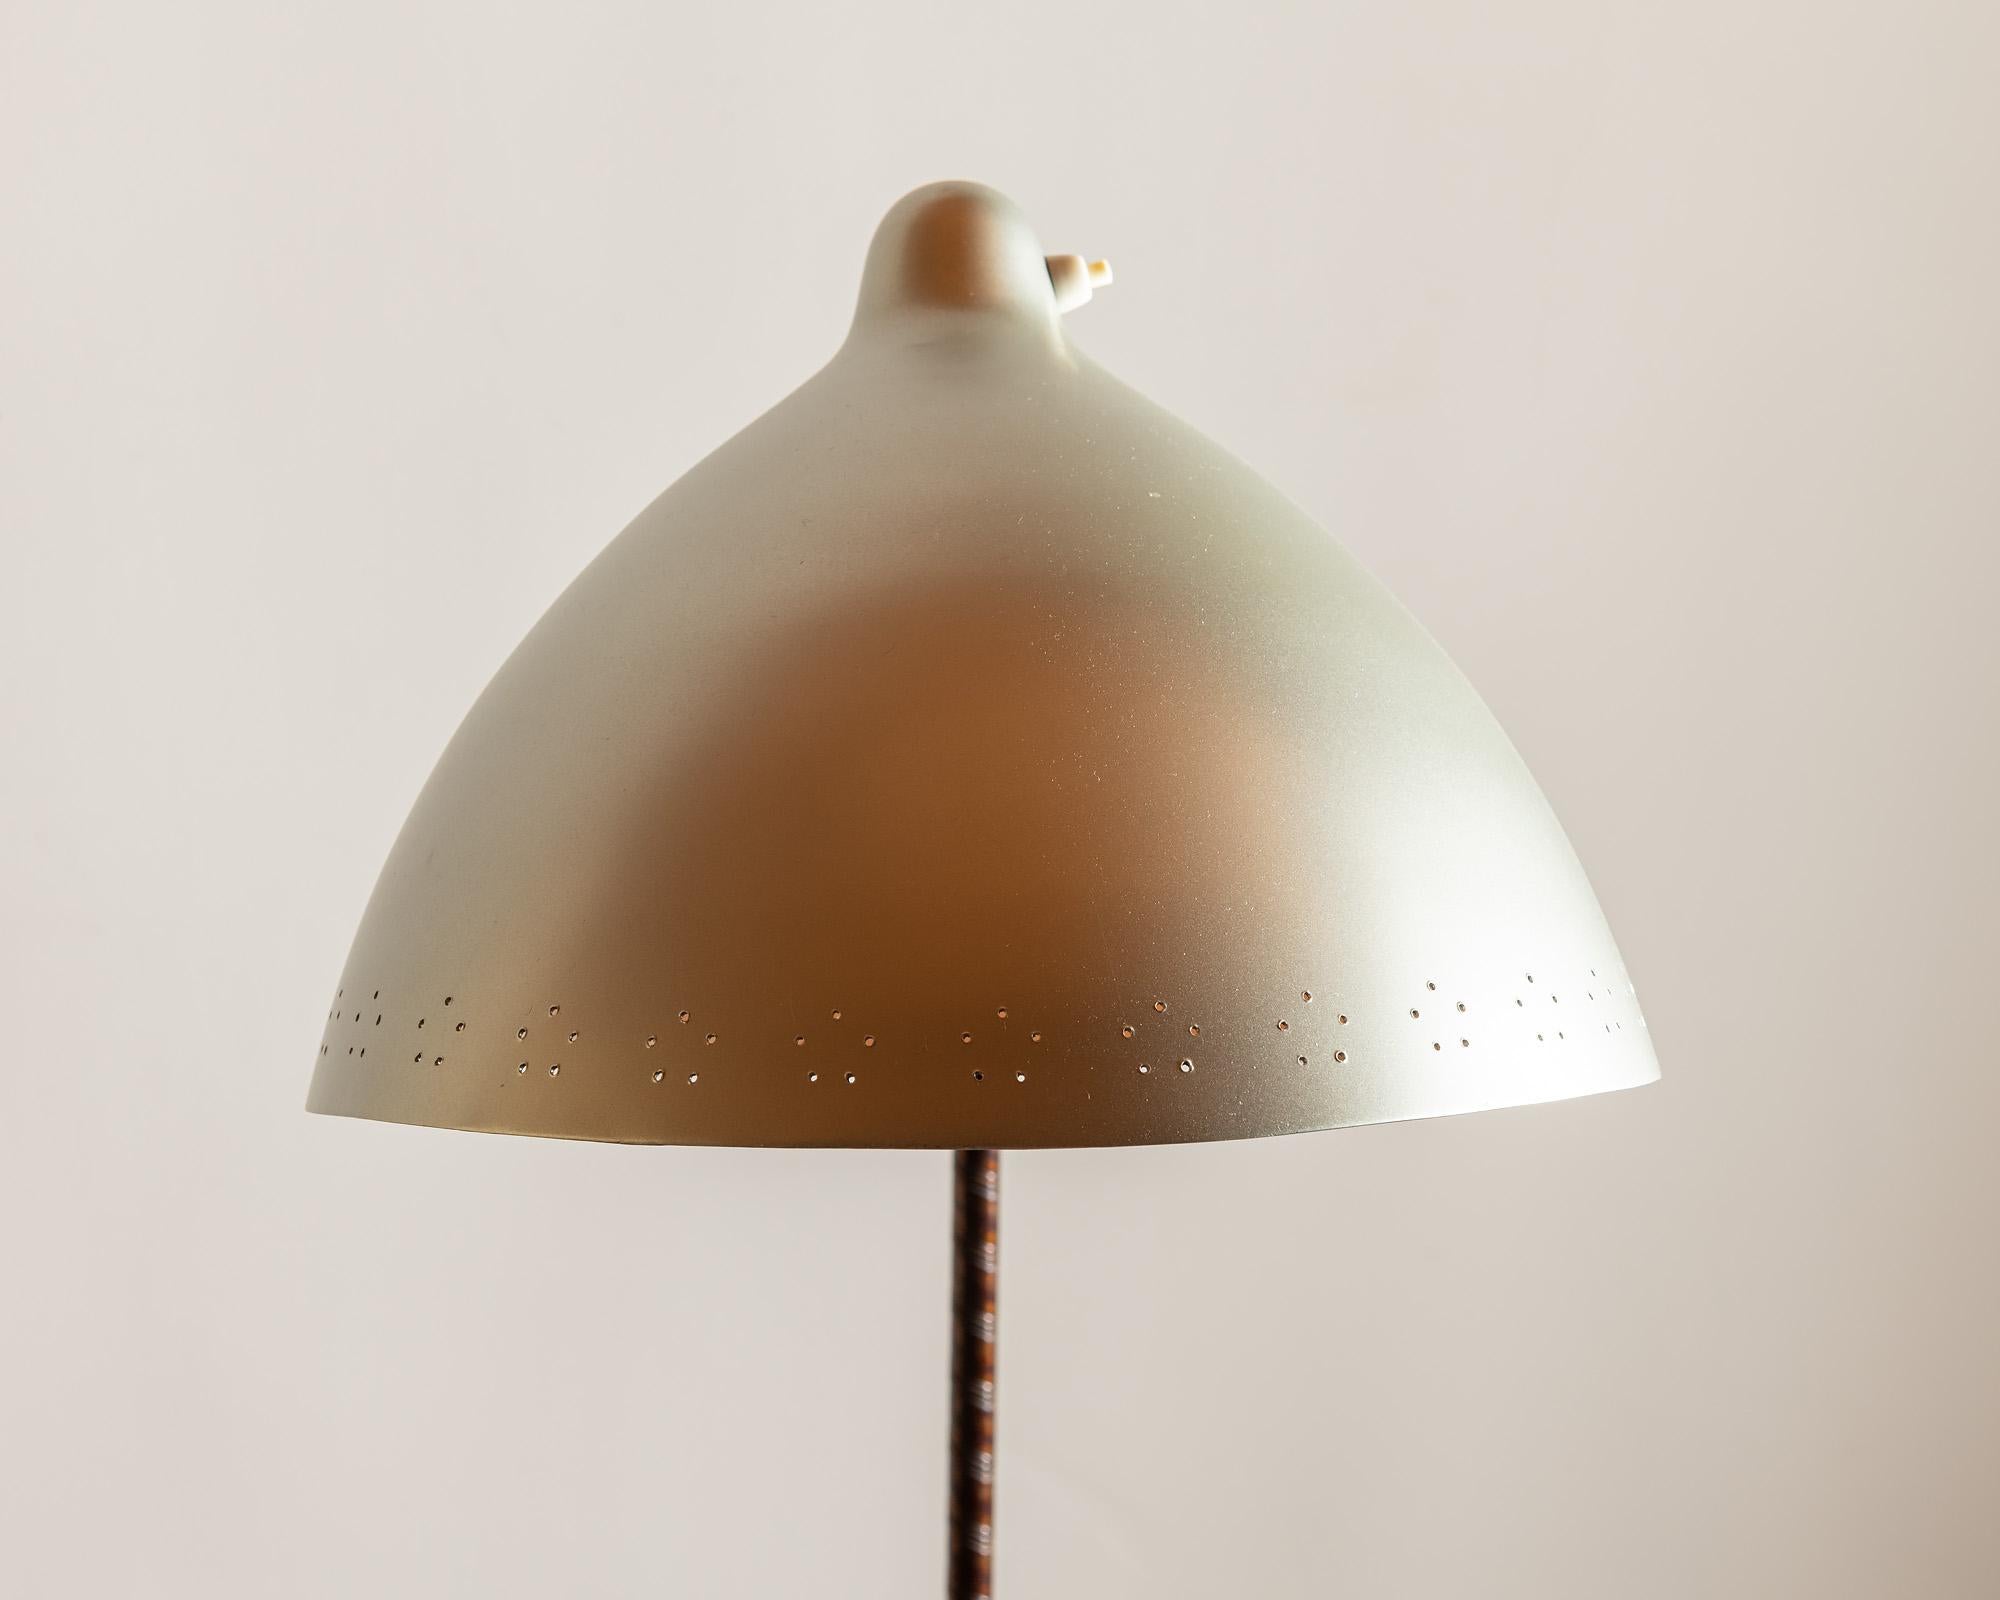 Mid-20th Century Lisa Johansson-Pape Floor Lamp in Brass, Steel and Leather, Finland, 1950s